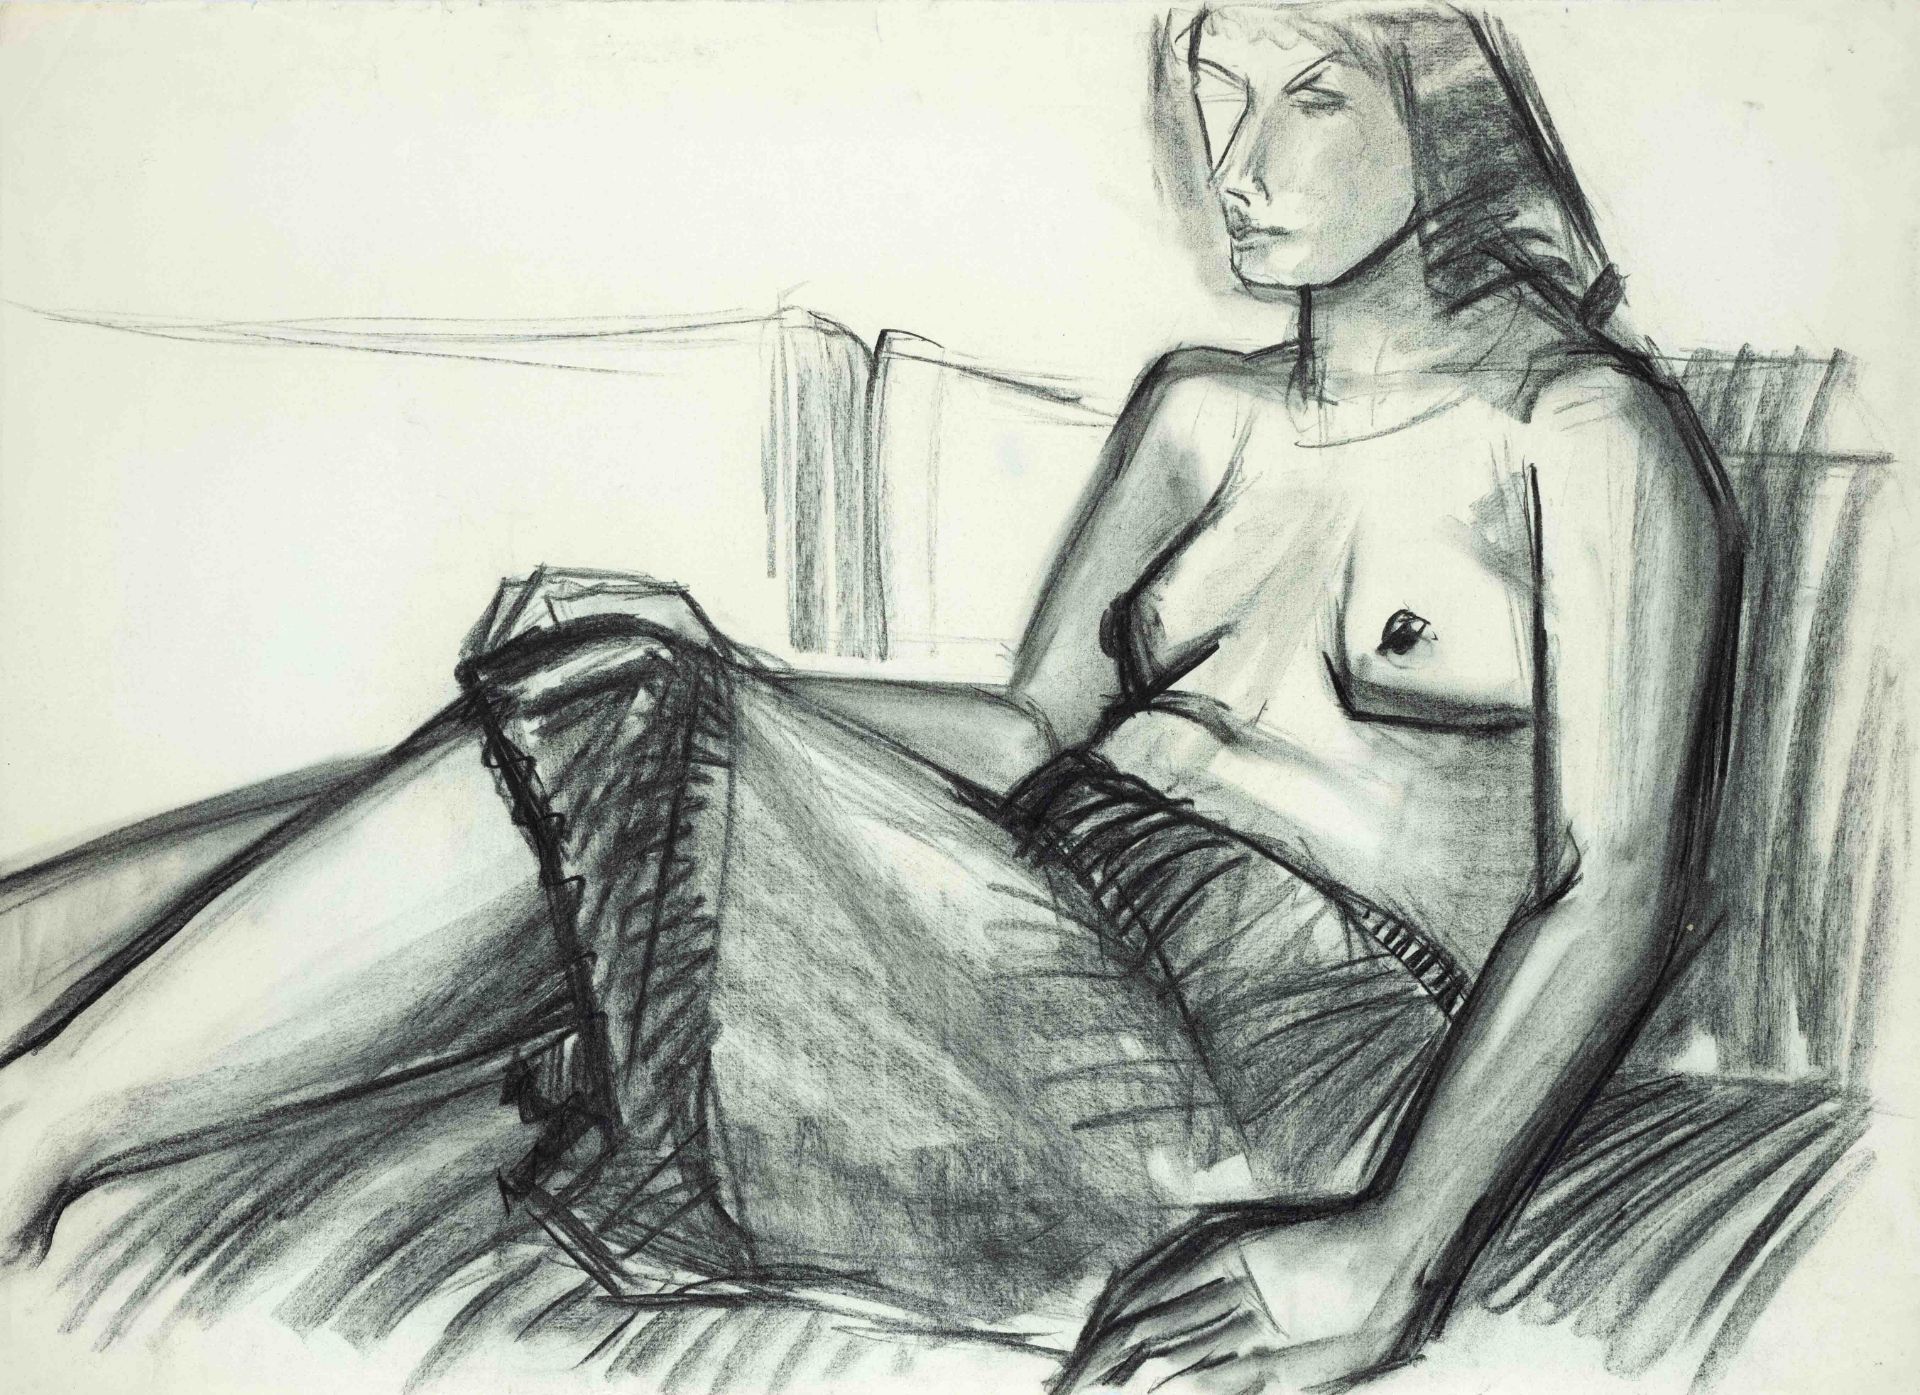 Marion Kallauka (*1949), 11 charcoal drawings by the Darmstadt-born artist, who studied in Berlin - Image 3 of 5